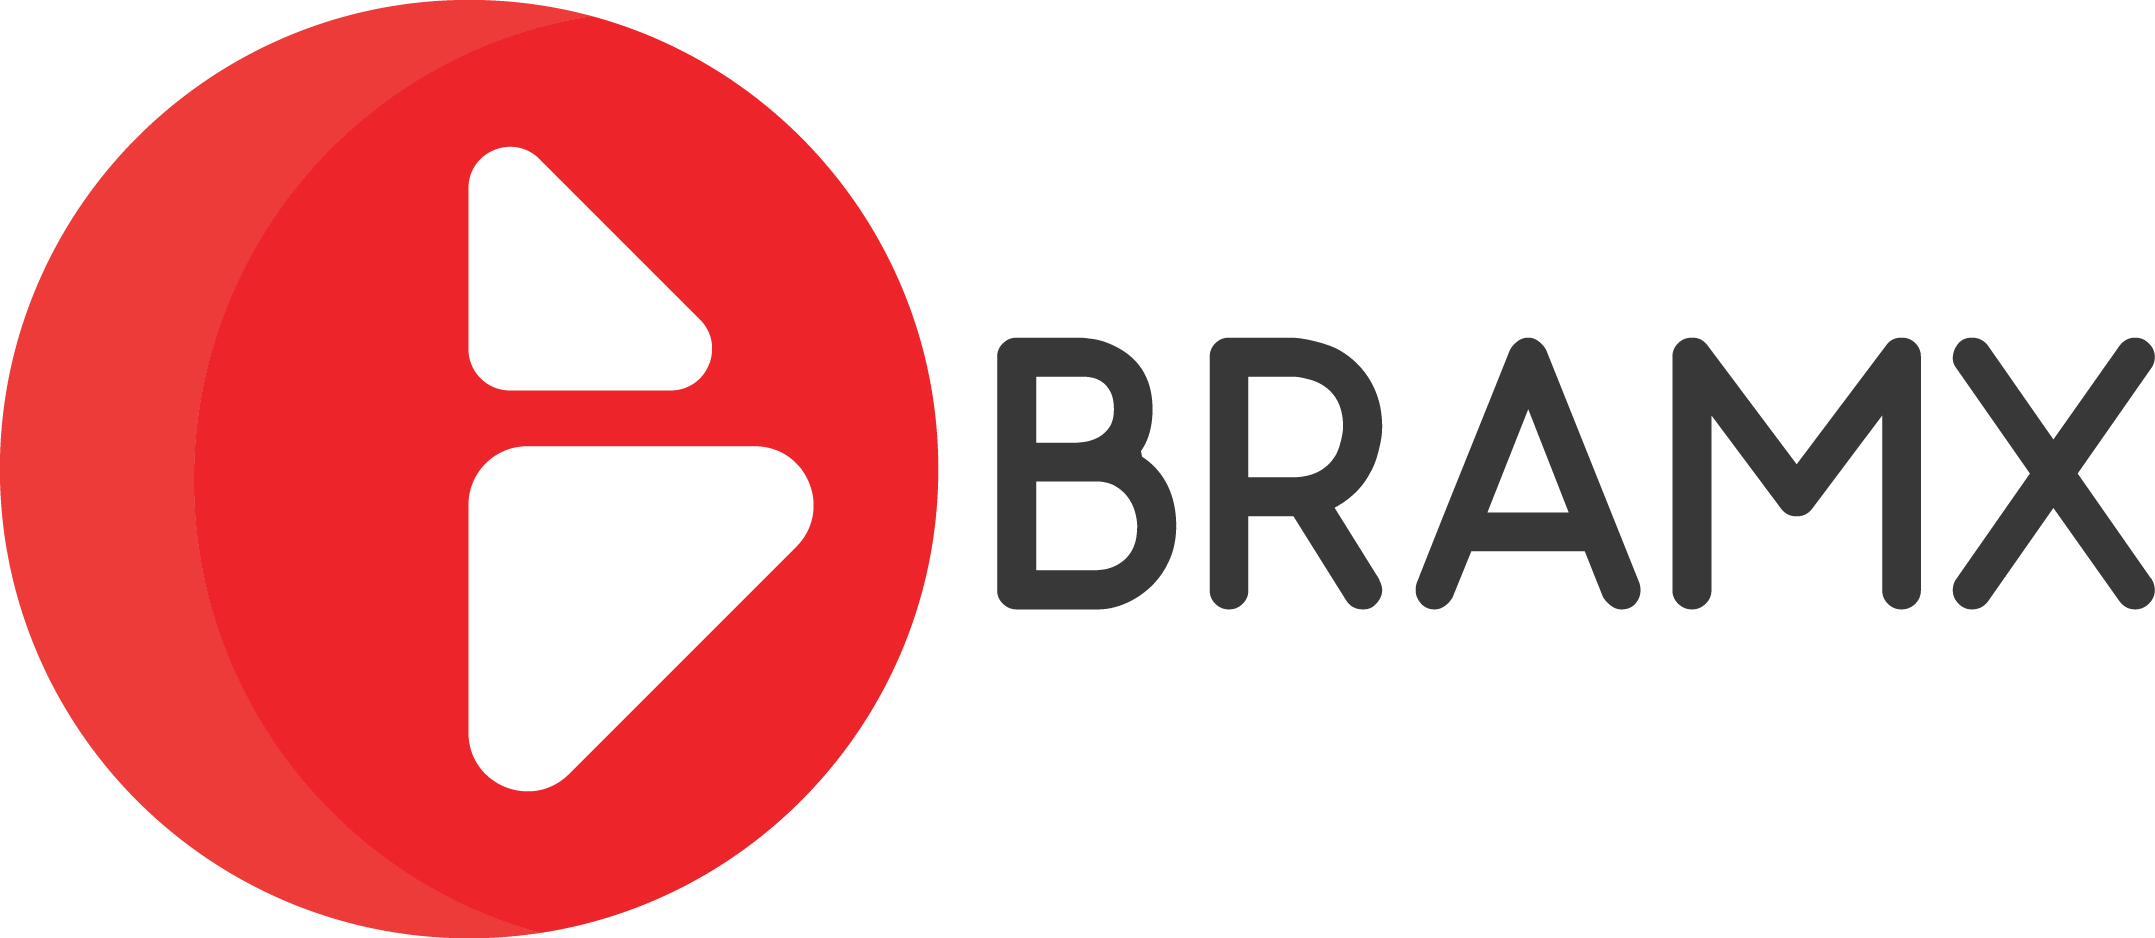 bramx.com is for sale